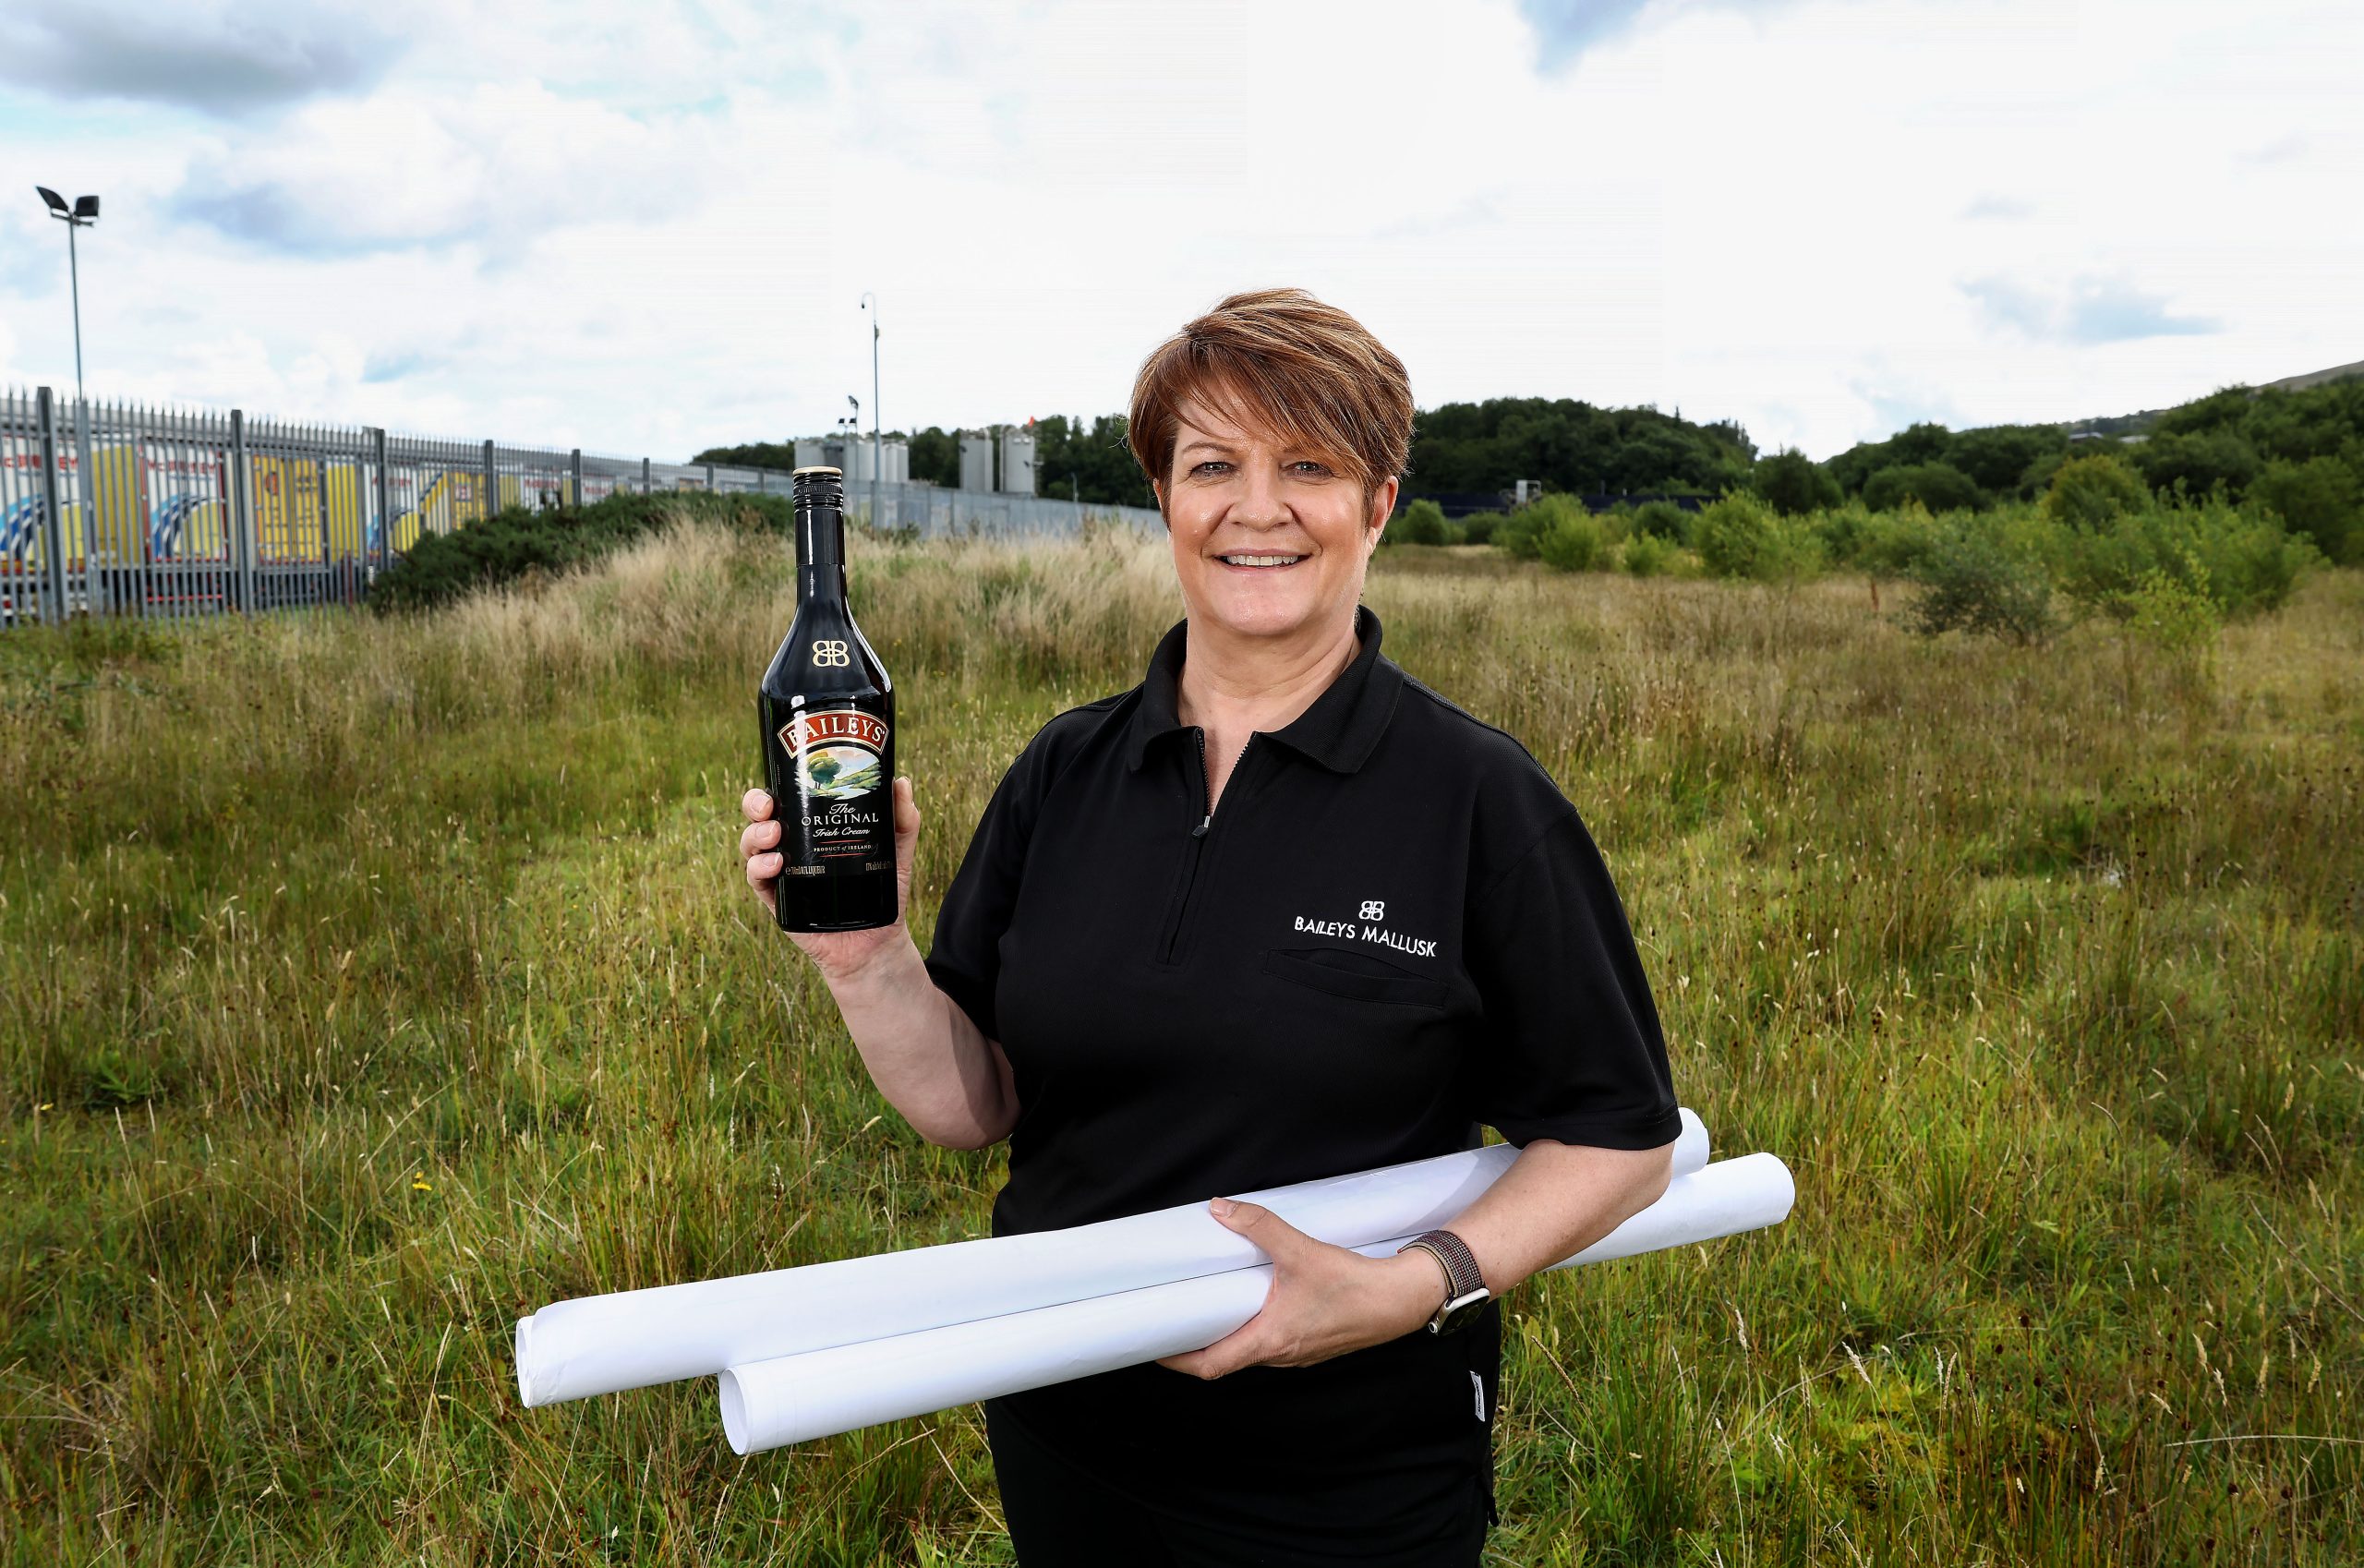 Diageo gets green light for £26m expansion of Baileys site